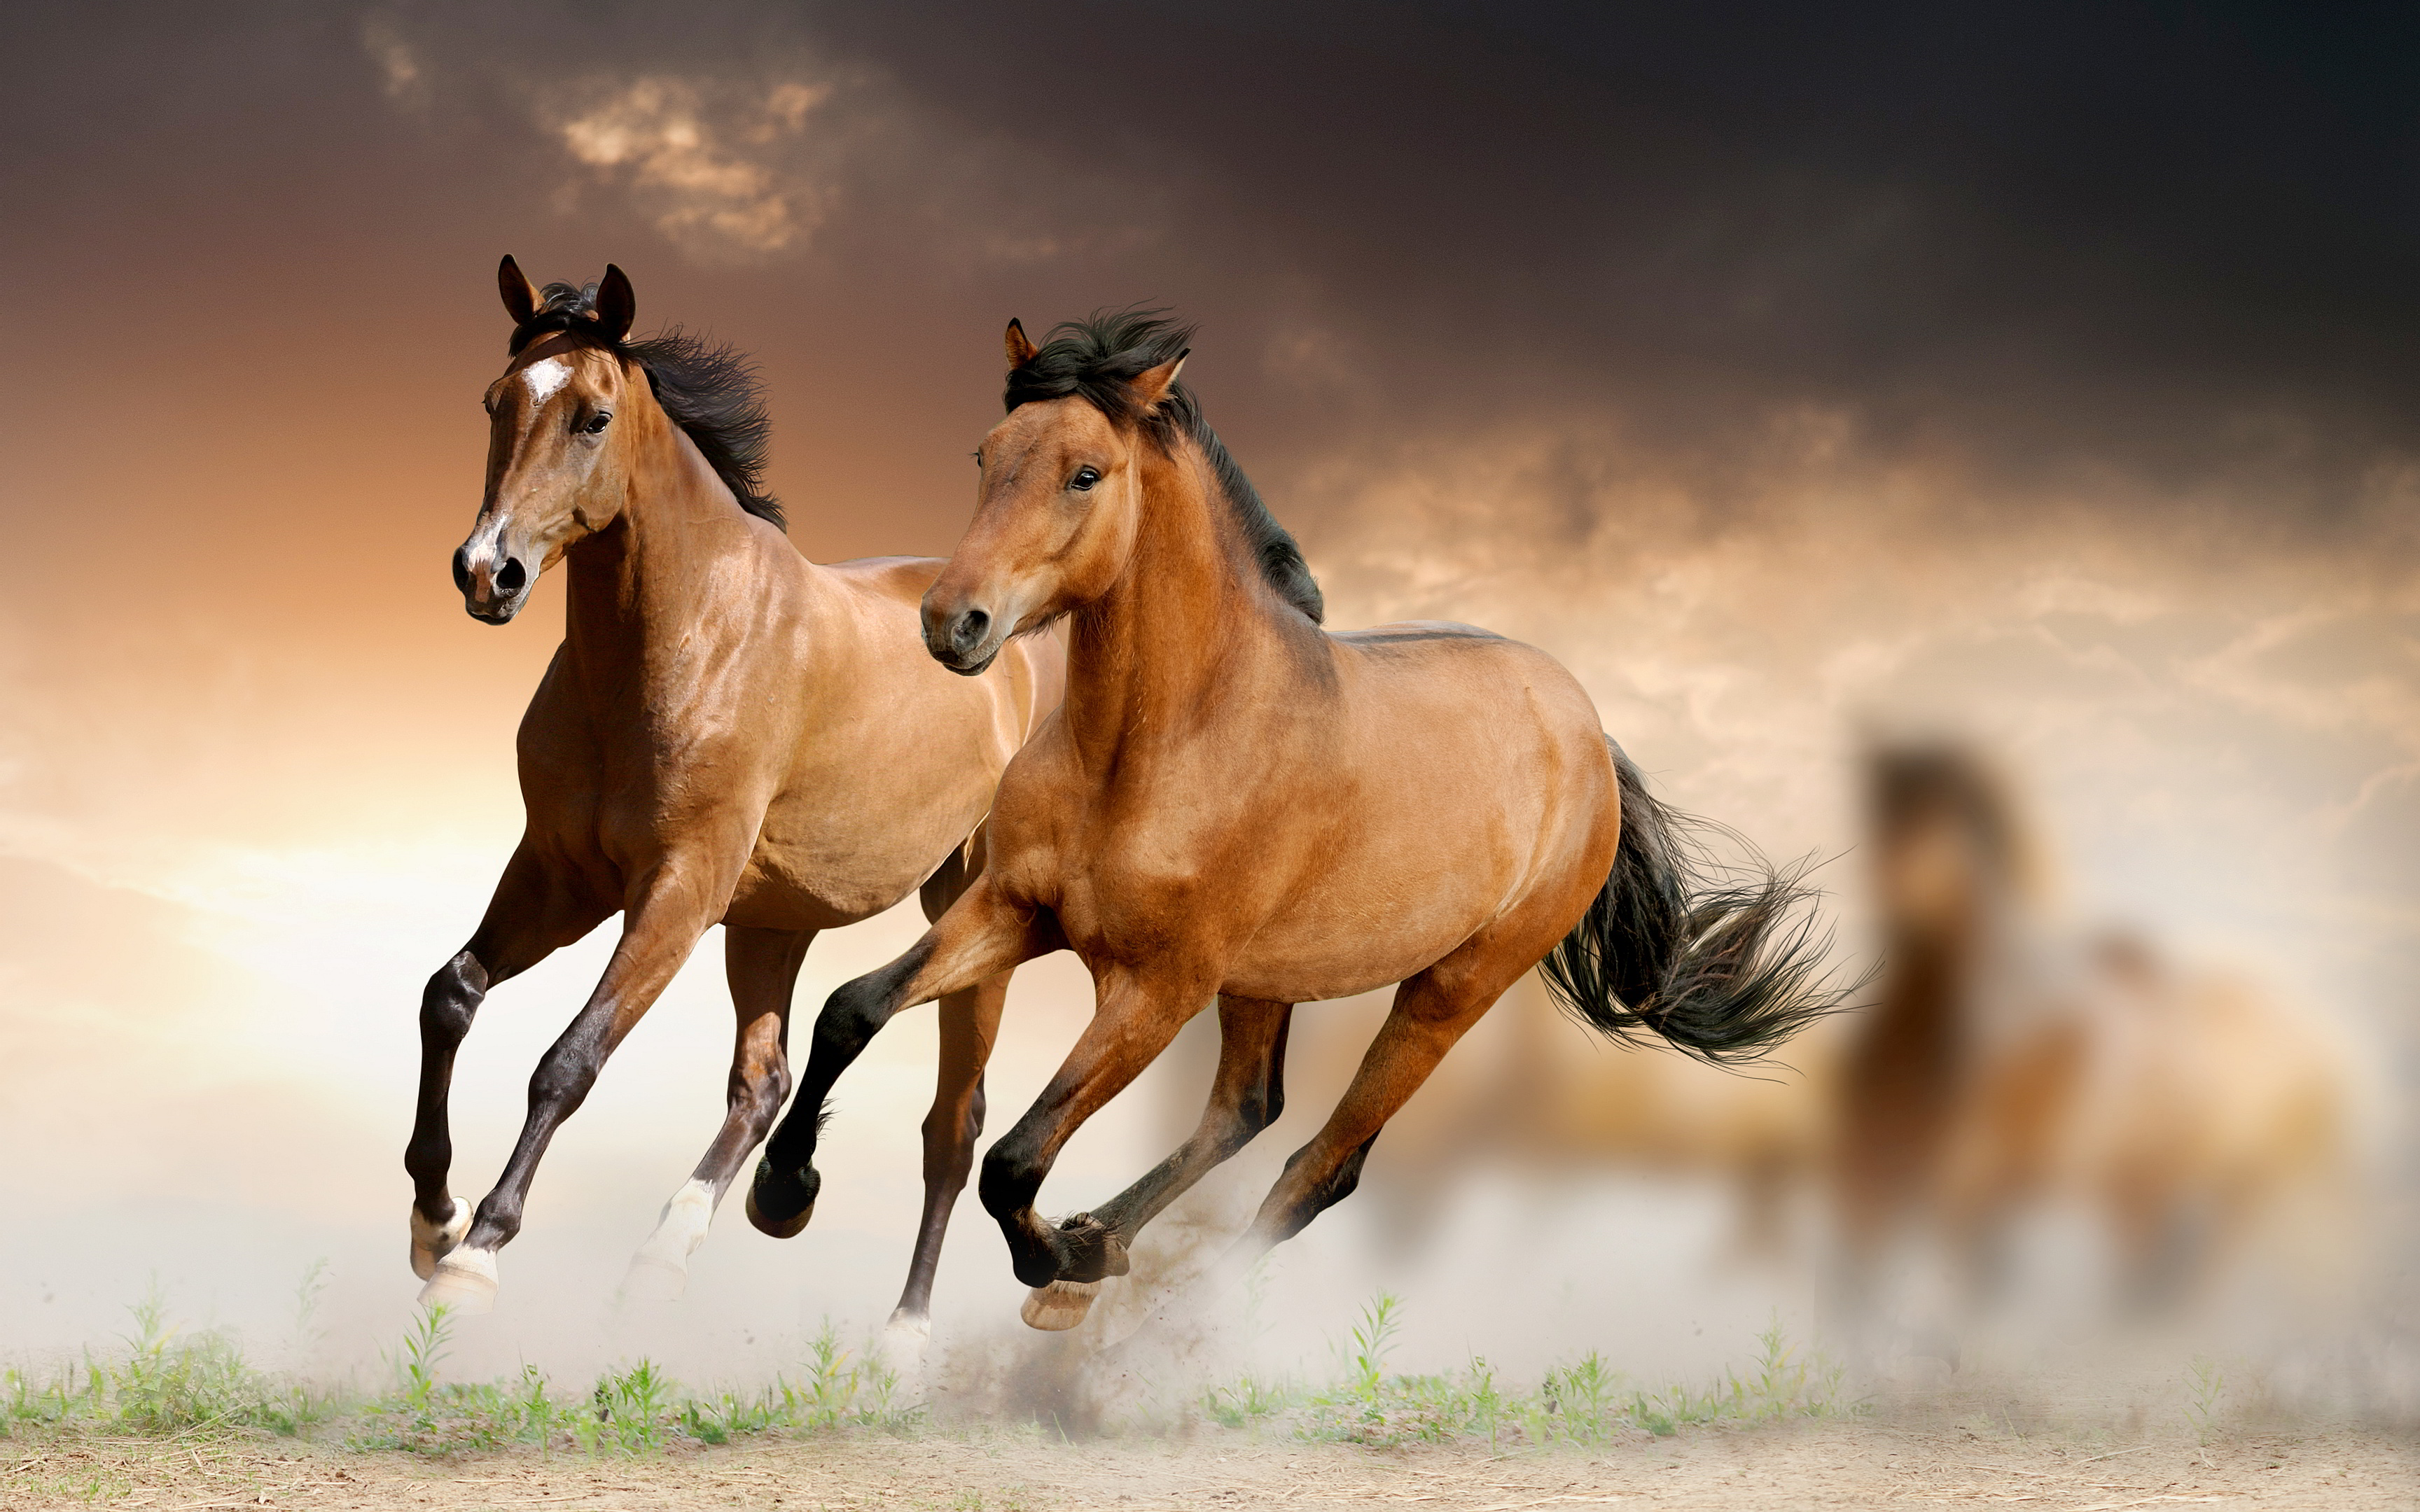 Horses Wallpapers High Quality | Download Free